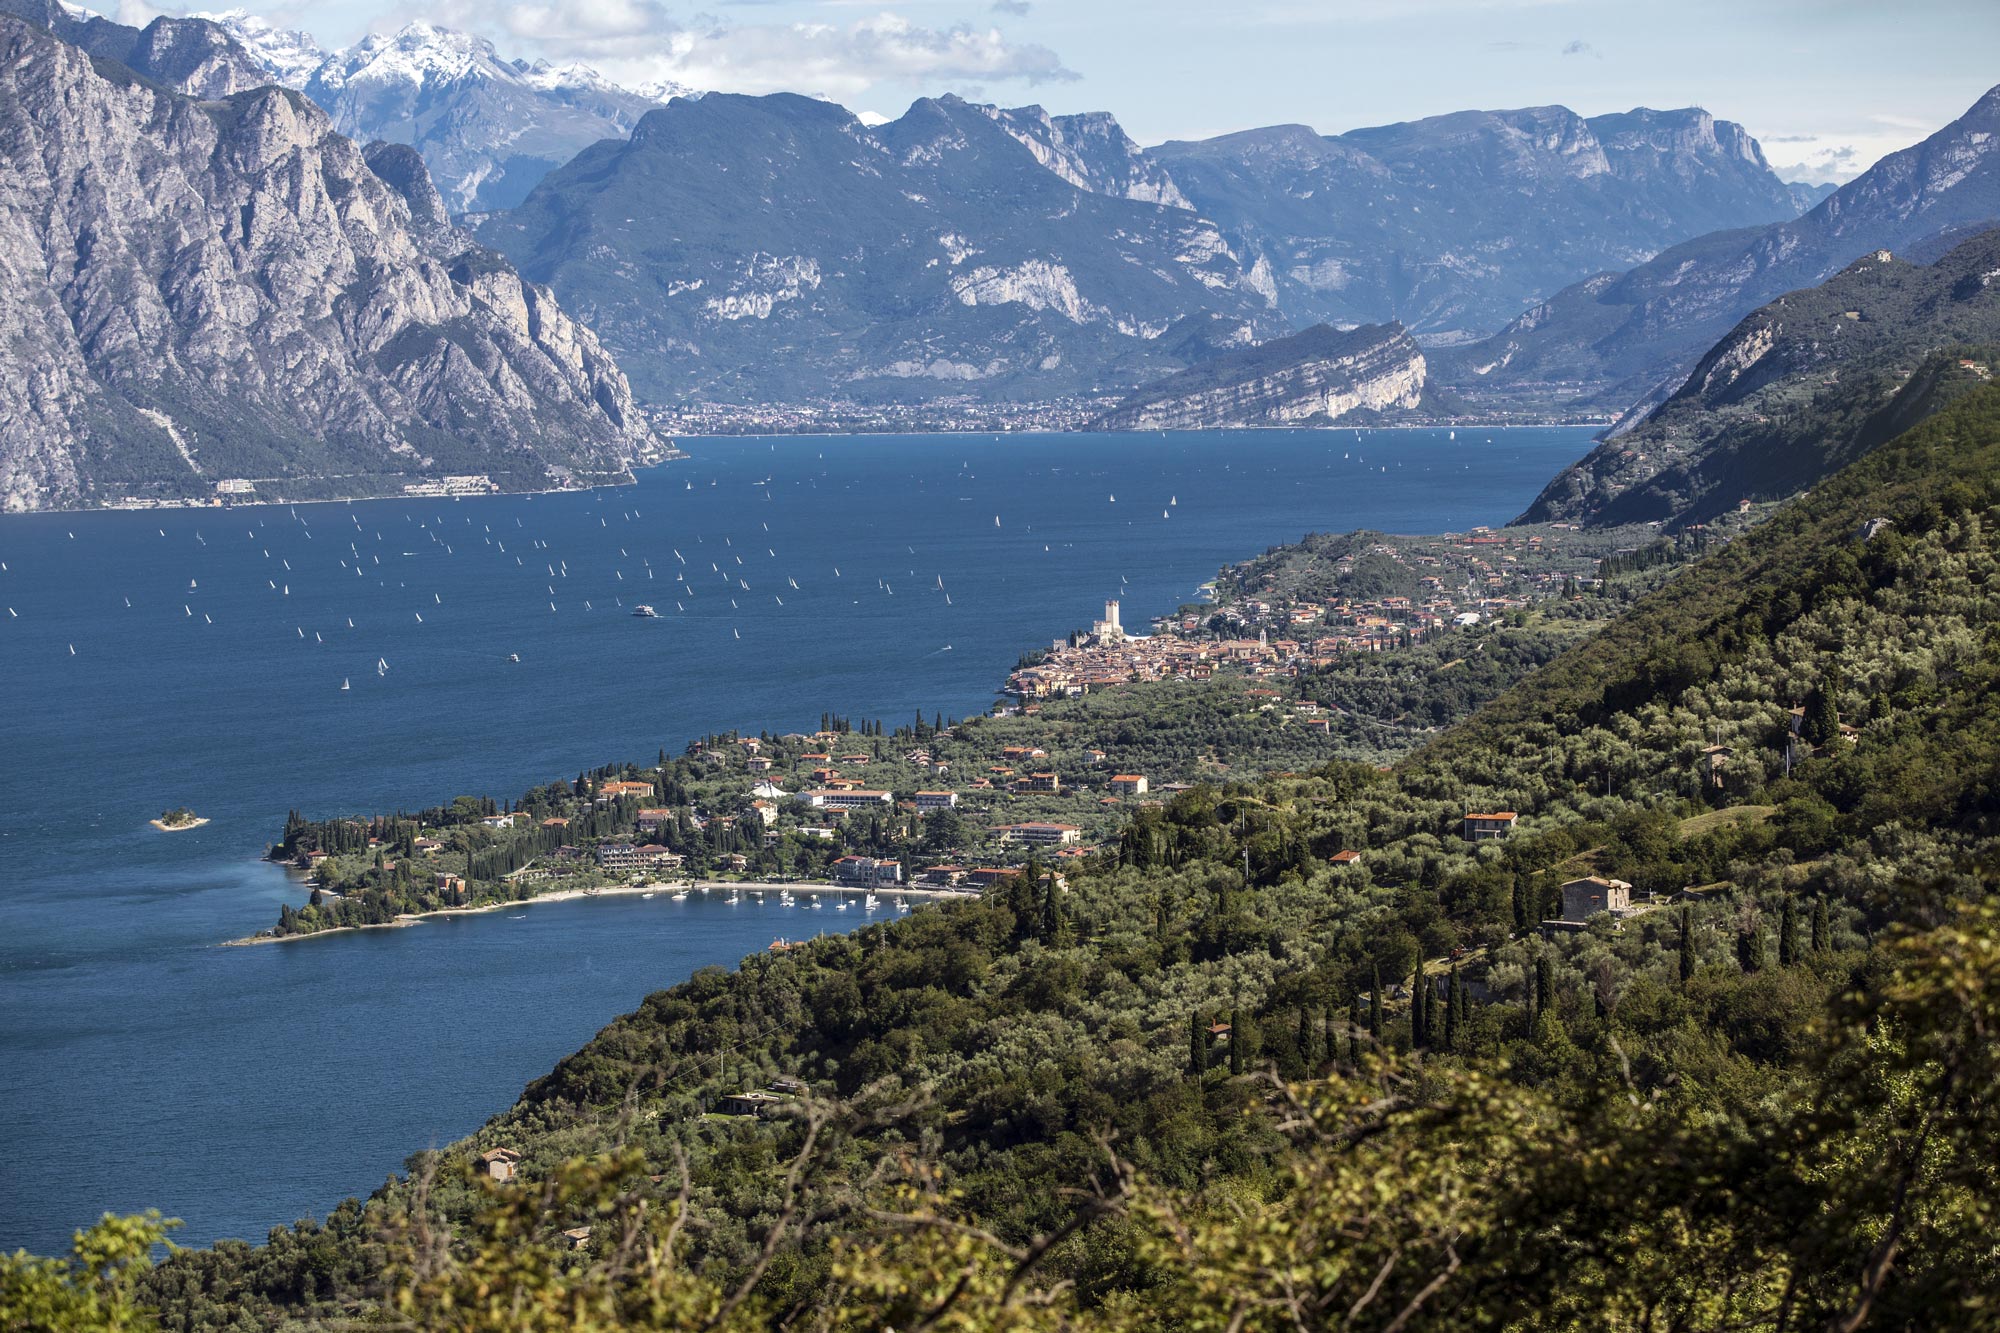 5 curiosities about Malcesine that not everyone knows